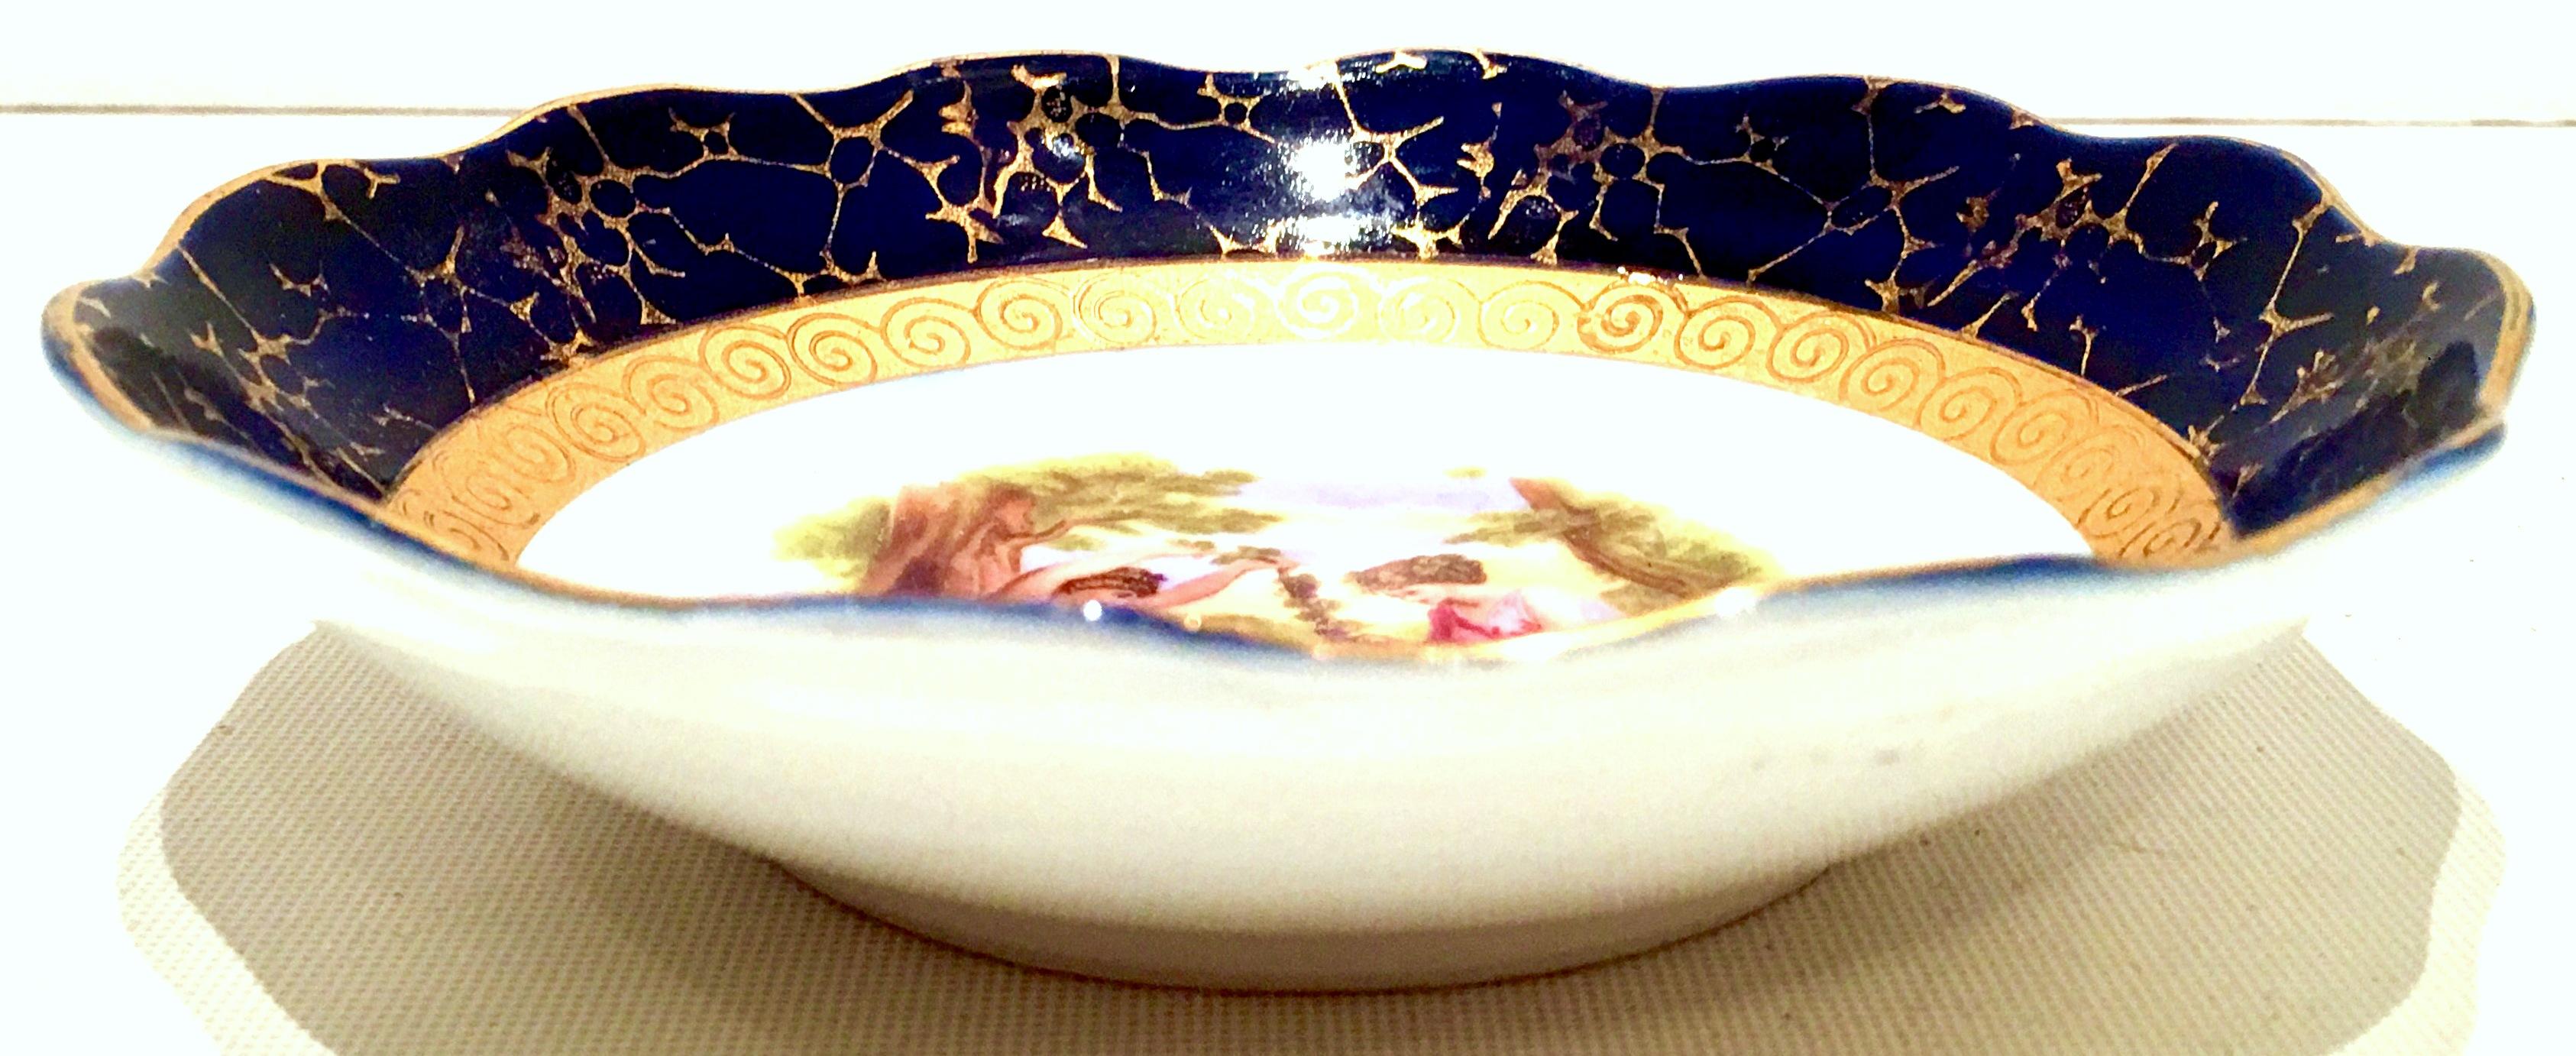 Mid-20th century German Sevres style porcelain hand painted cobalt and 24-karat gold detail dish. Features two women and a child outdoors. Signed on the underside Echt Cobalt-Martinroda. Signed front left by the artist.